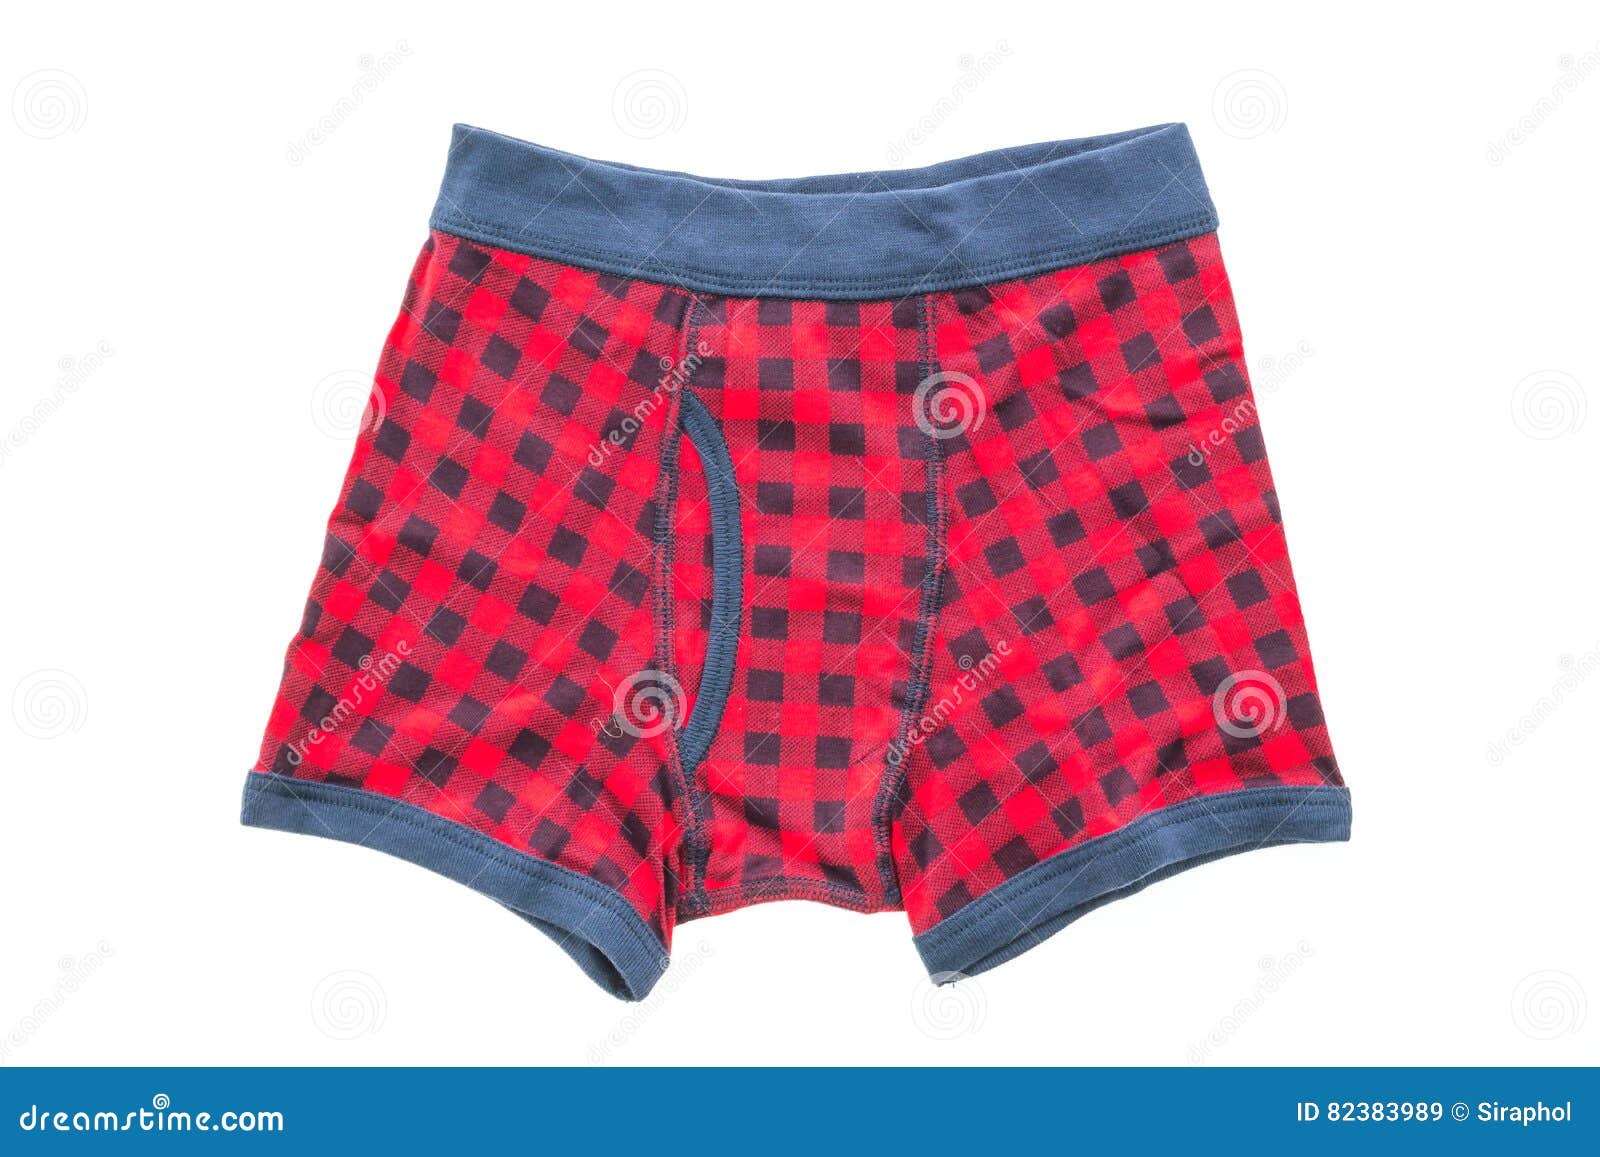 Short Underwear for Kid and Boy Stock Image - Image of object, boxer ...